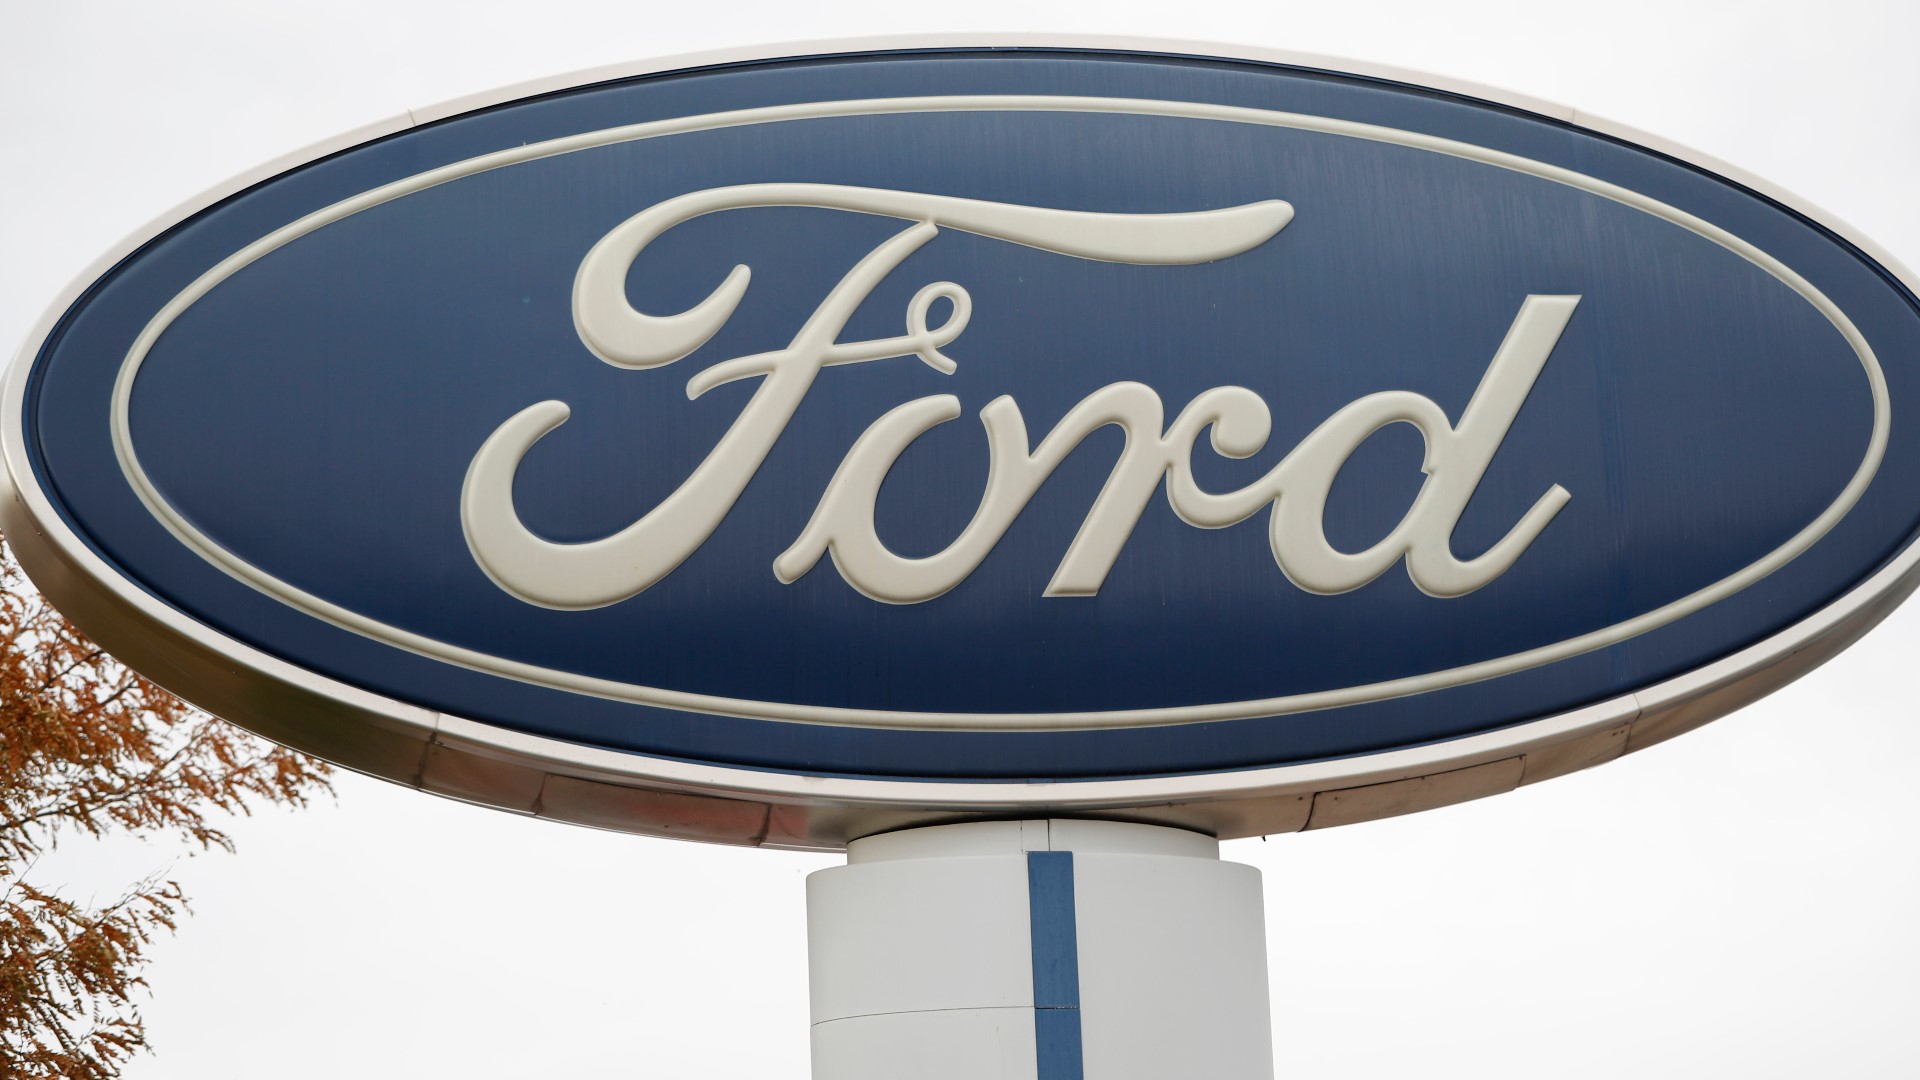 Ford is recalling over 240,000 SUVs and cars worldwide because a suspension part can fracture and increase the risk of a crash.